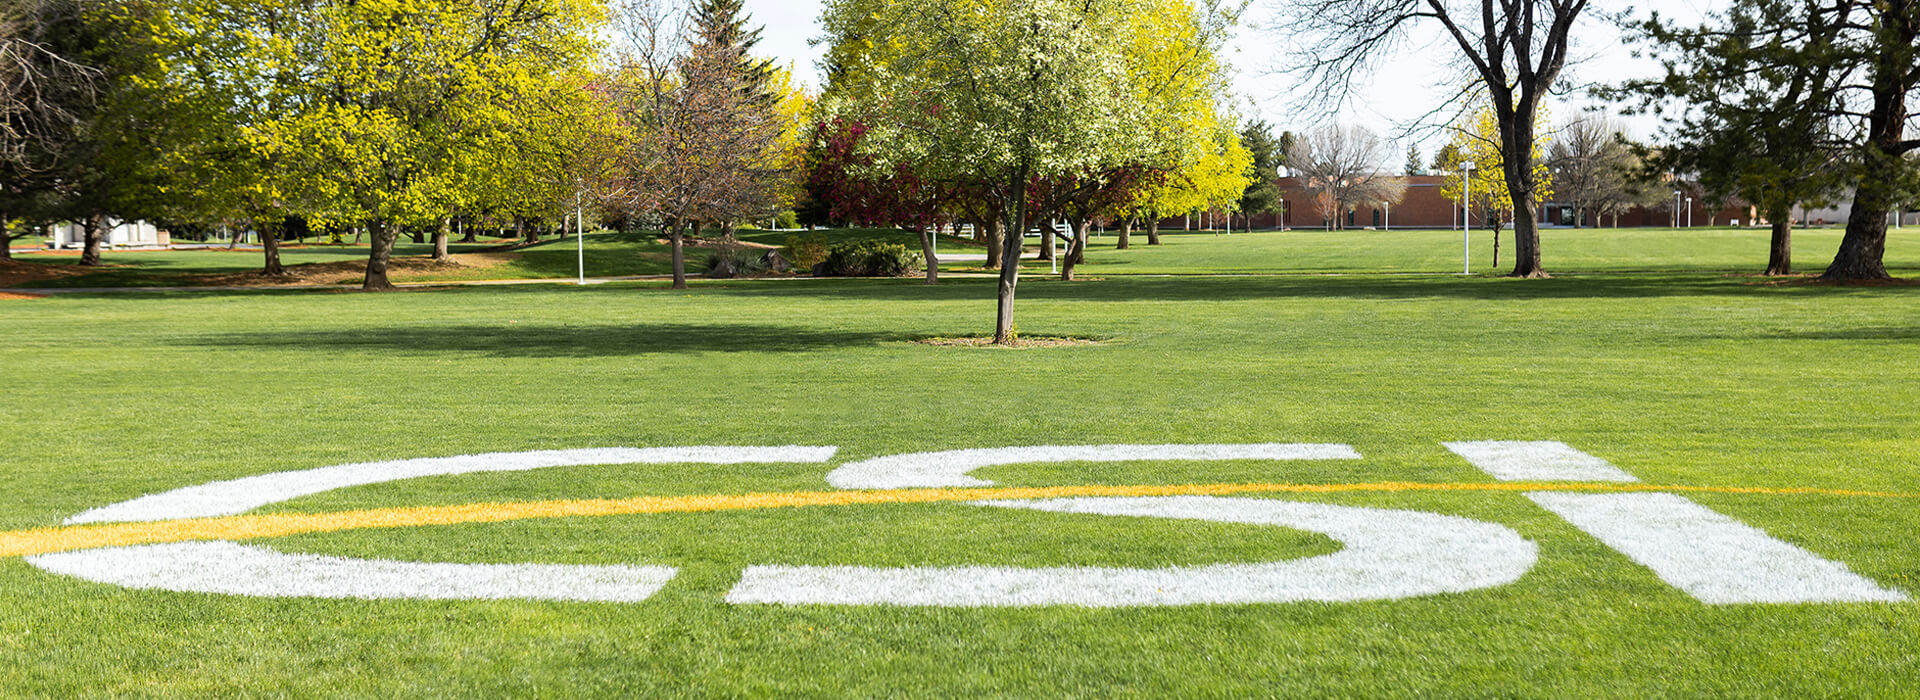 CSI logo painted on the grass with trees and buildings in the background